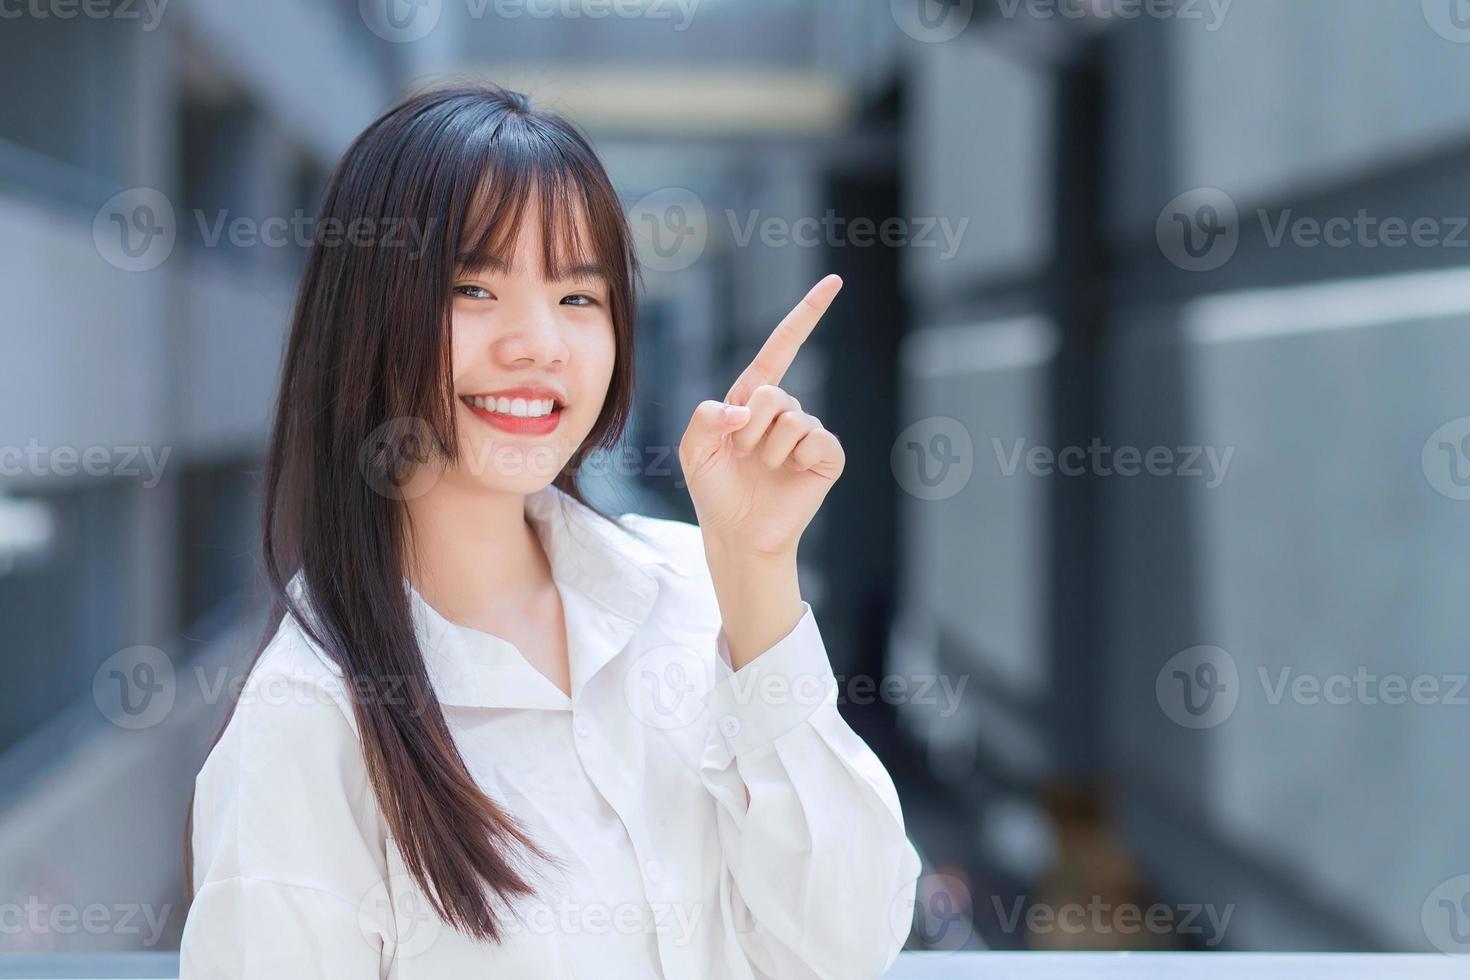 Professional young Asian working woman who wears white shirt is pointing hand to present something while outdoors in the city with an office building in the background. photo